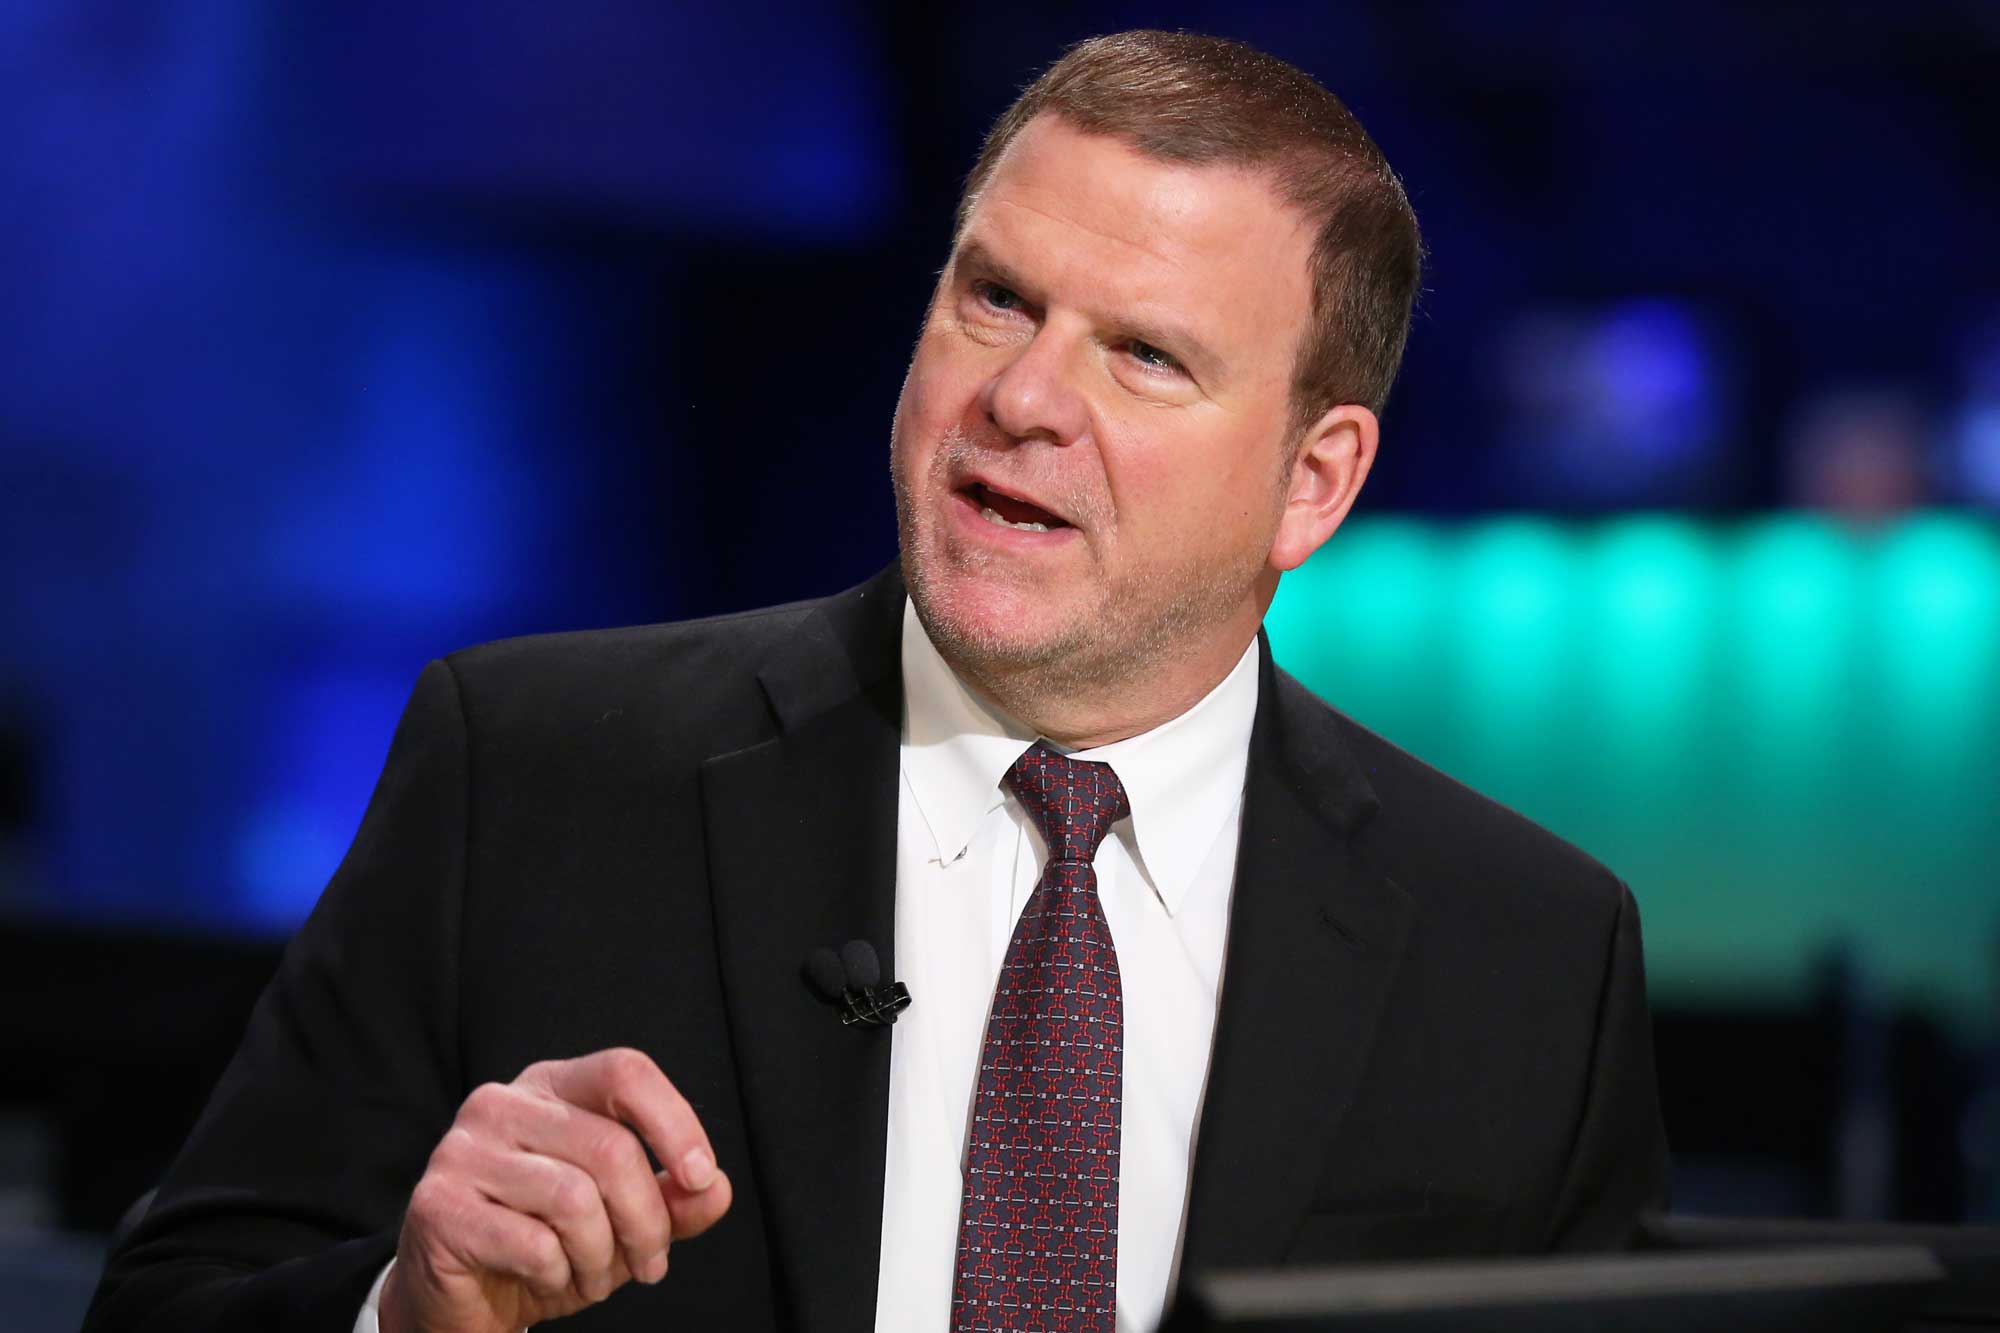 Tilman Fertitta says client spending will likely be robust even after stimulus fades